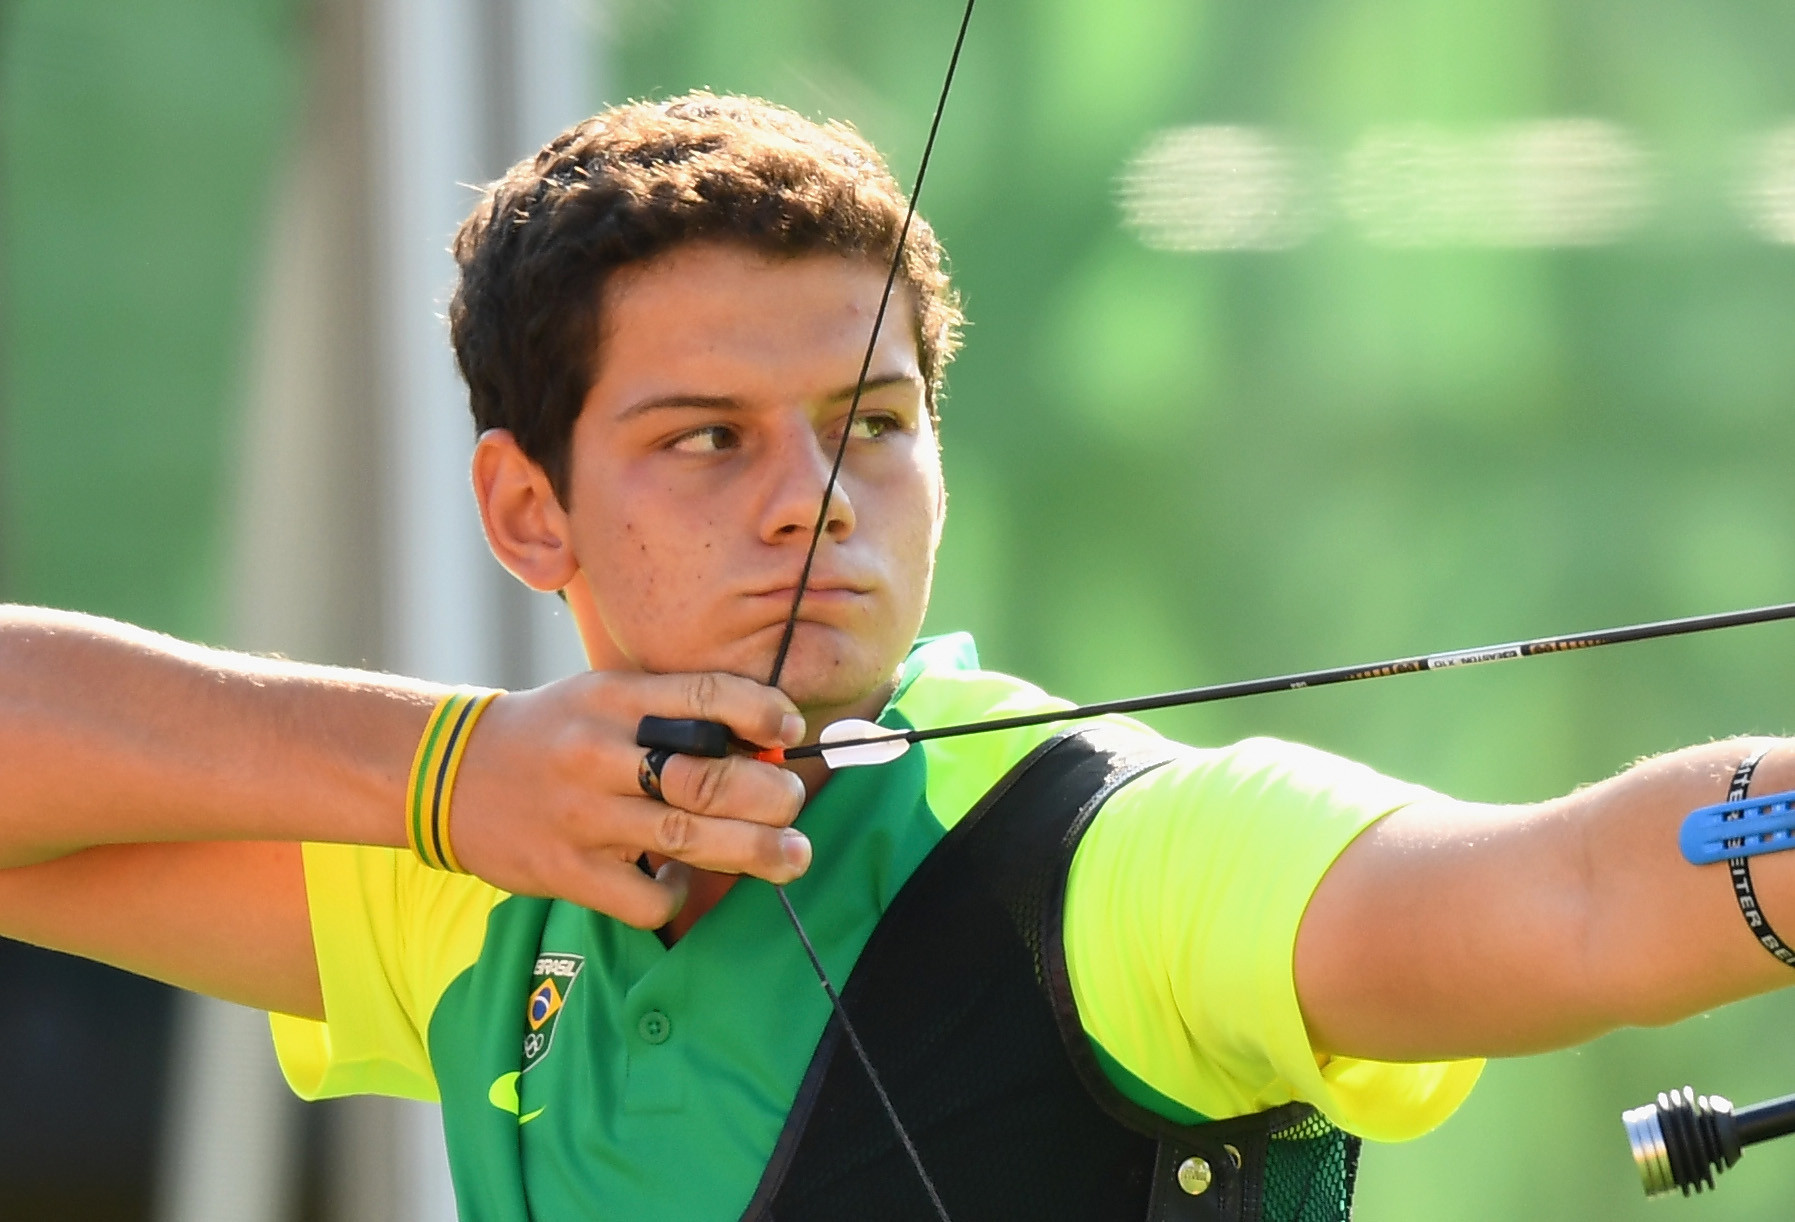 Qualification begins at Pan and Parapan American Archery Championships